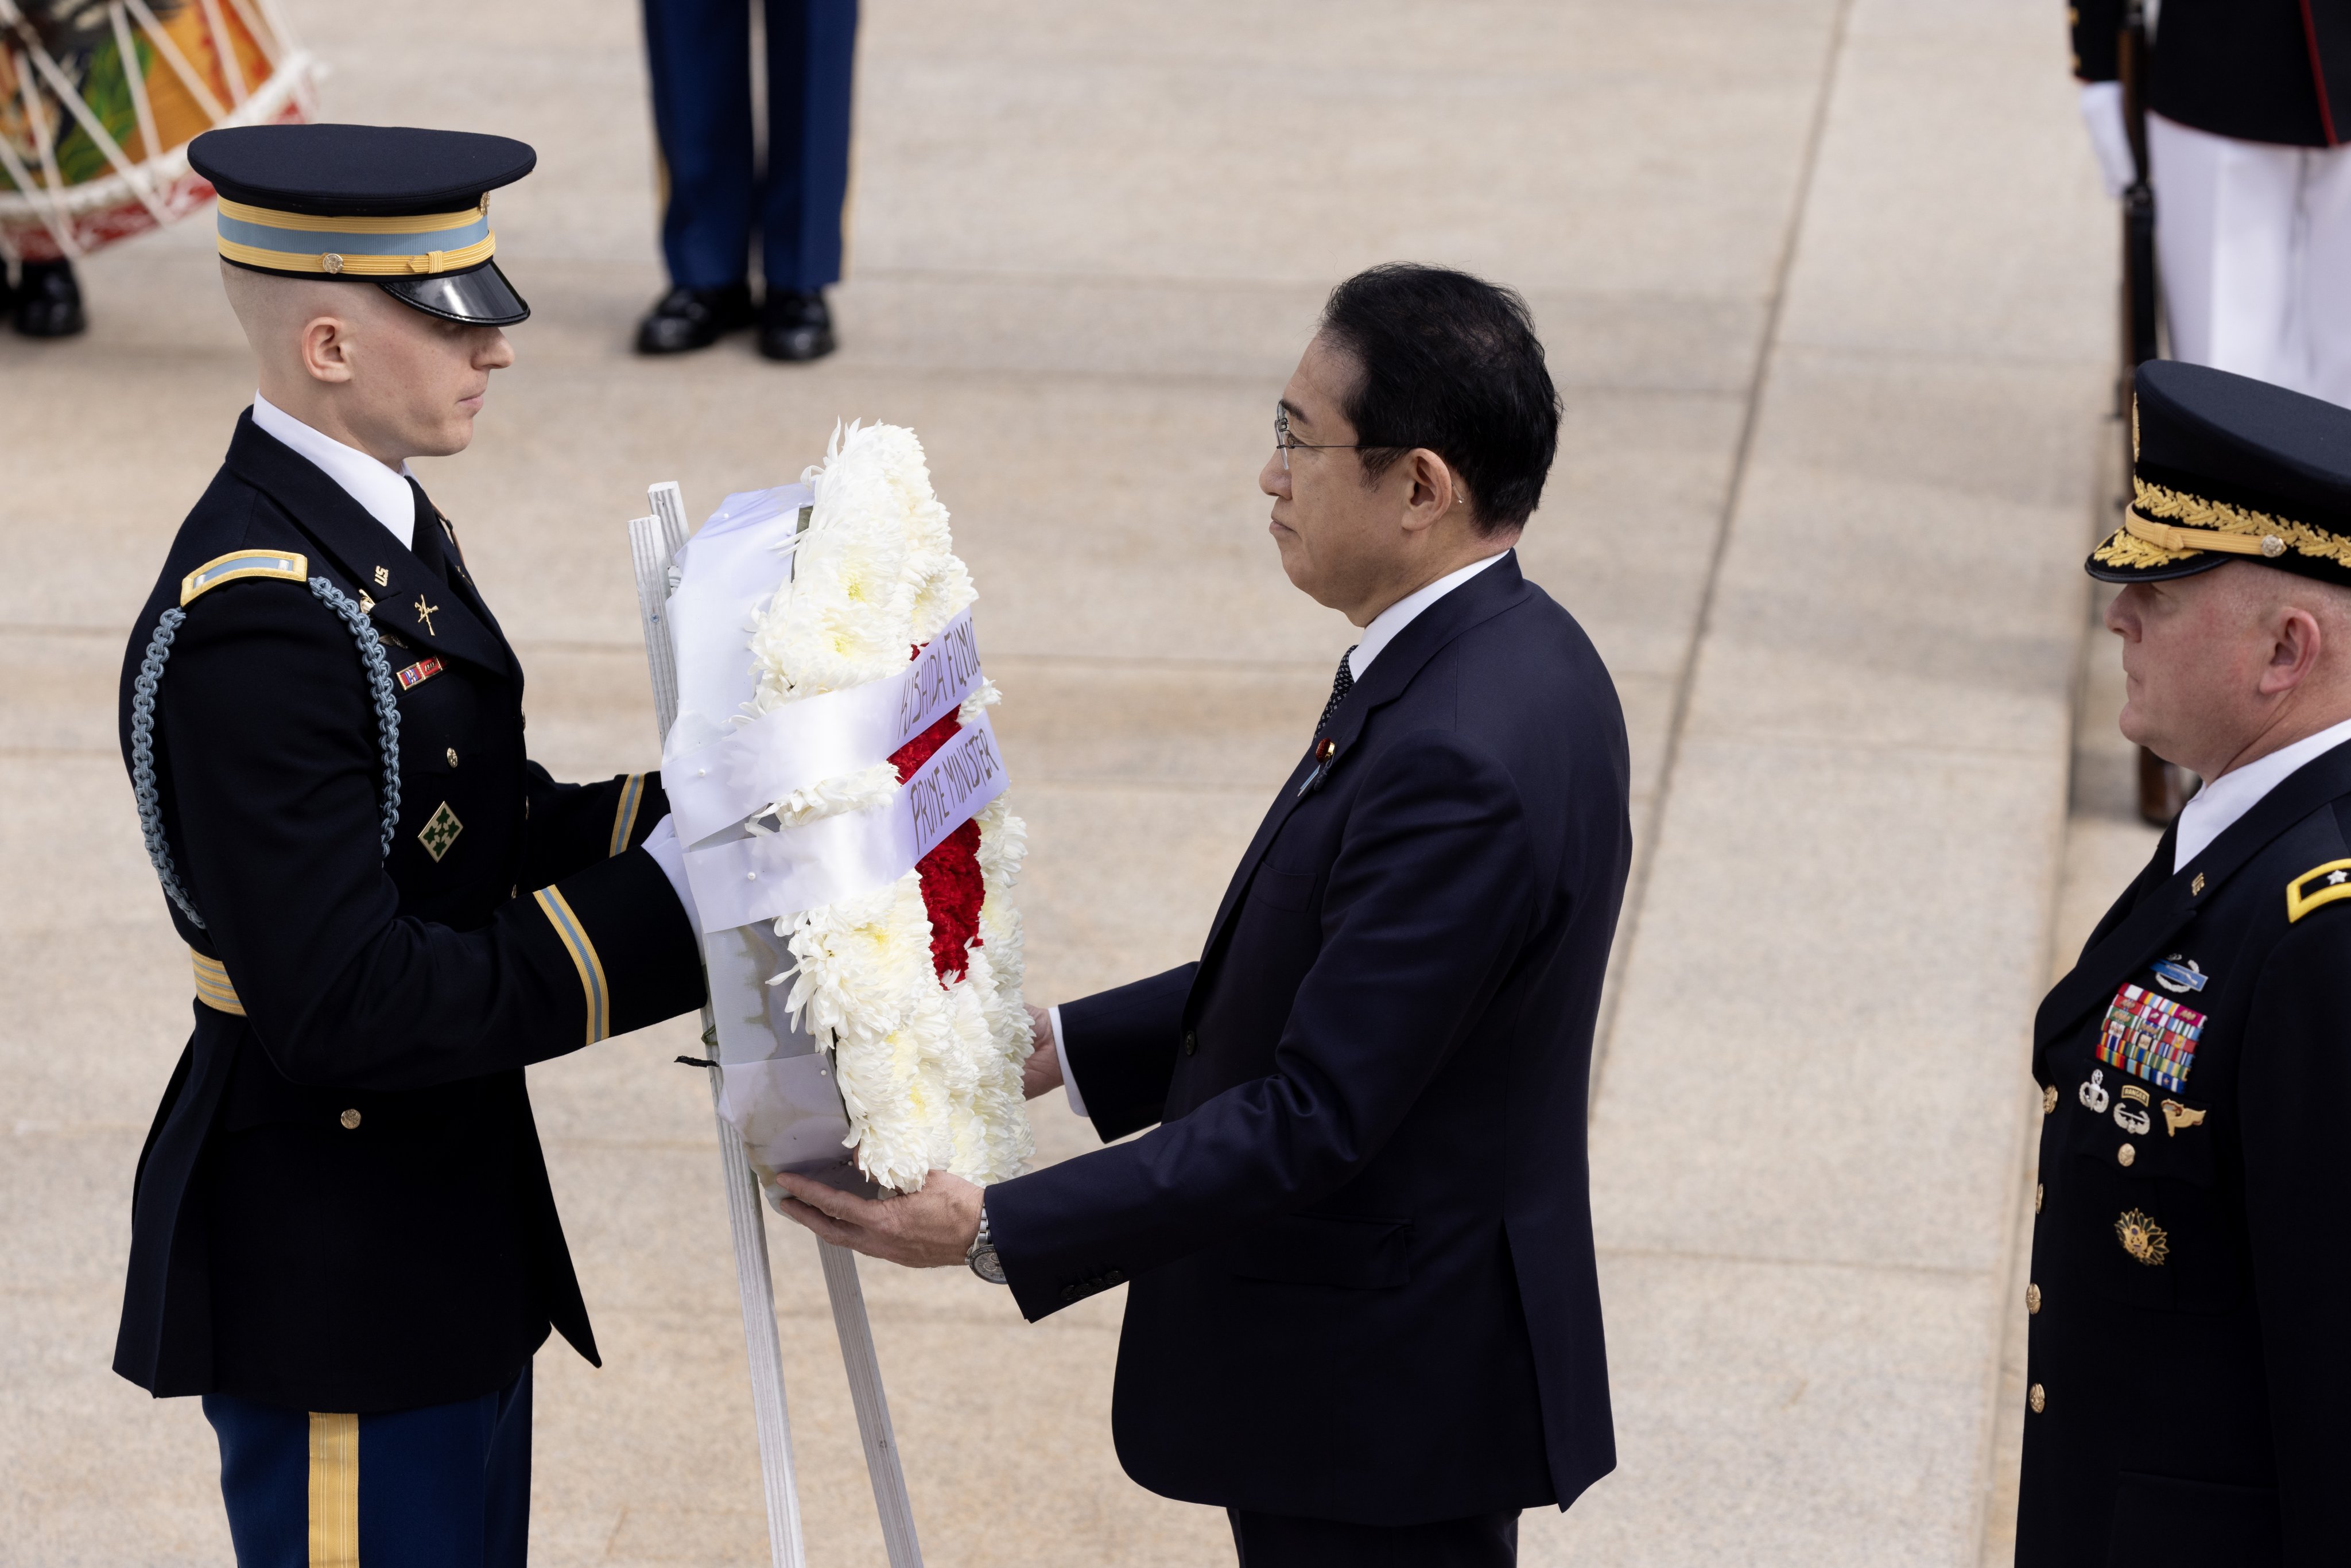 Japanese Prime Minister Fumio Kishida (centre) takes part in a US Armed Forces full-honor wreath ceremony at the Tomb of the Unknown Soldier at Arlington National Cemetery in Virginia on Tuesday. Photo: EPA-EFE